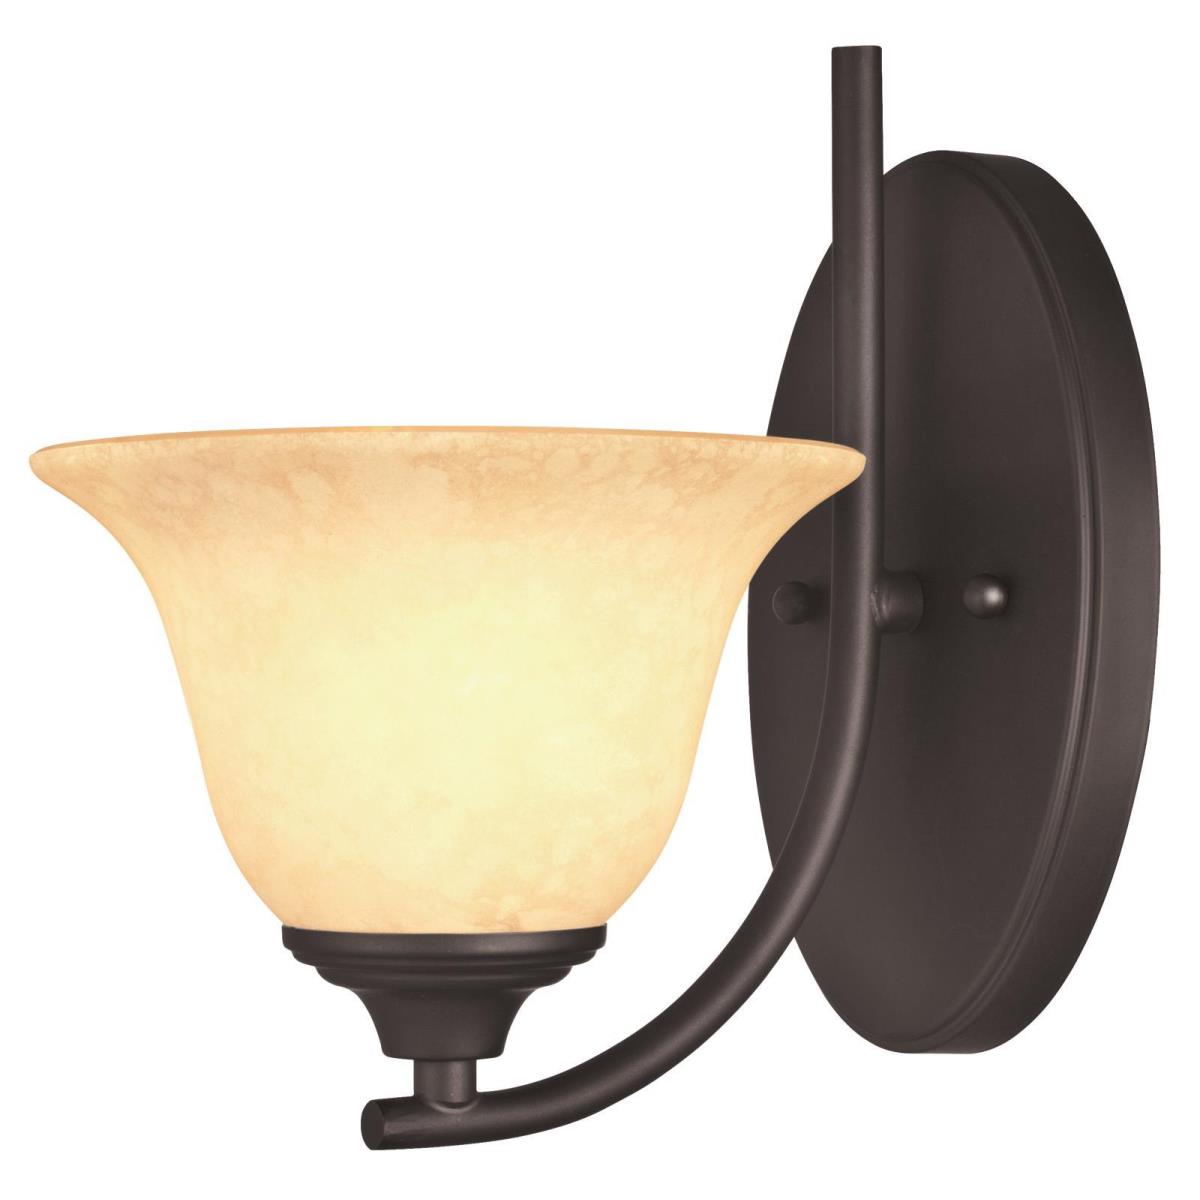 1 Light Wall Fixture Oil Rubbed Bronze Finish with Burnt Scavo Glass